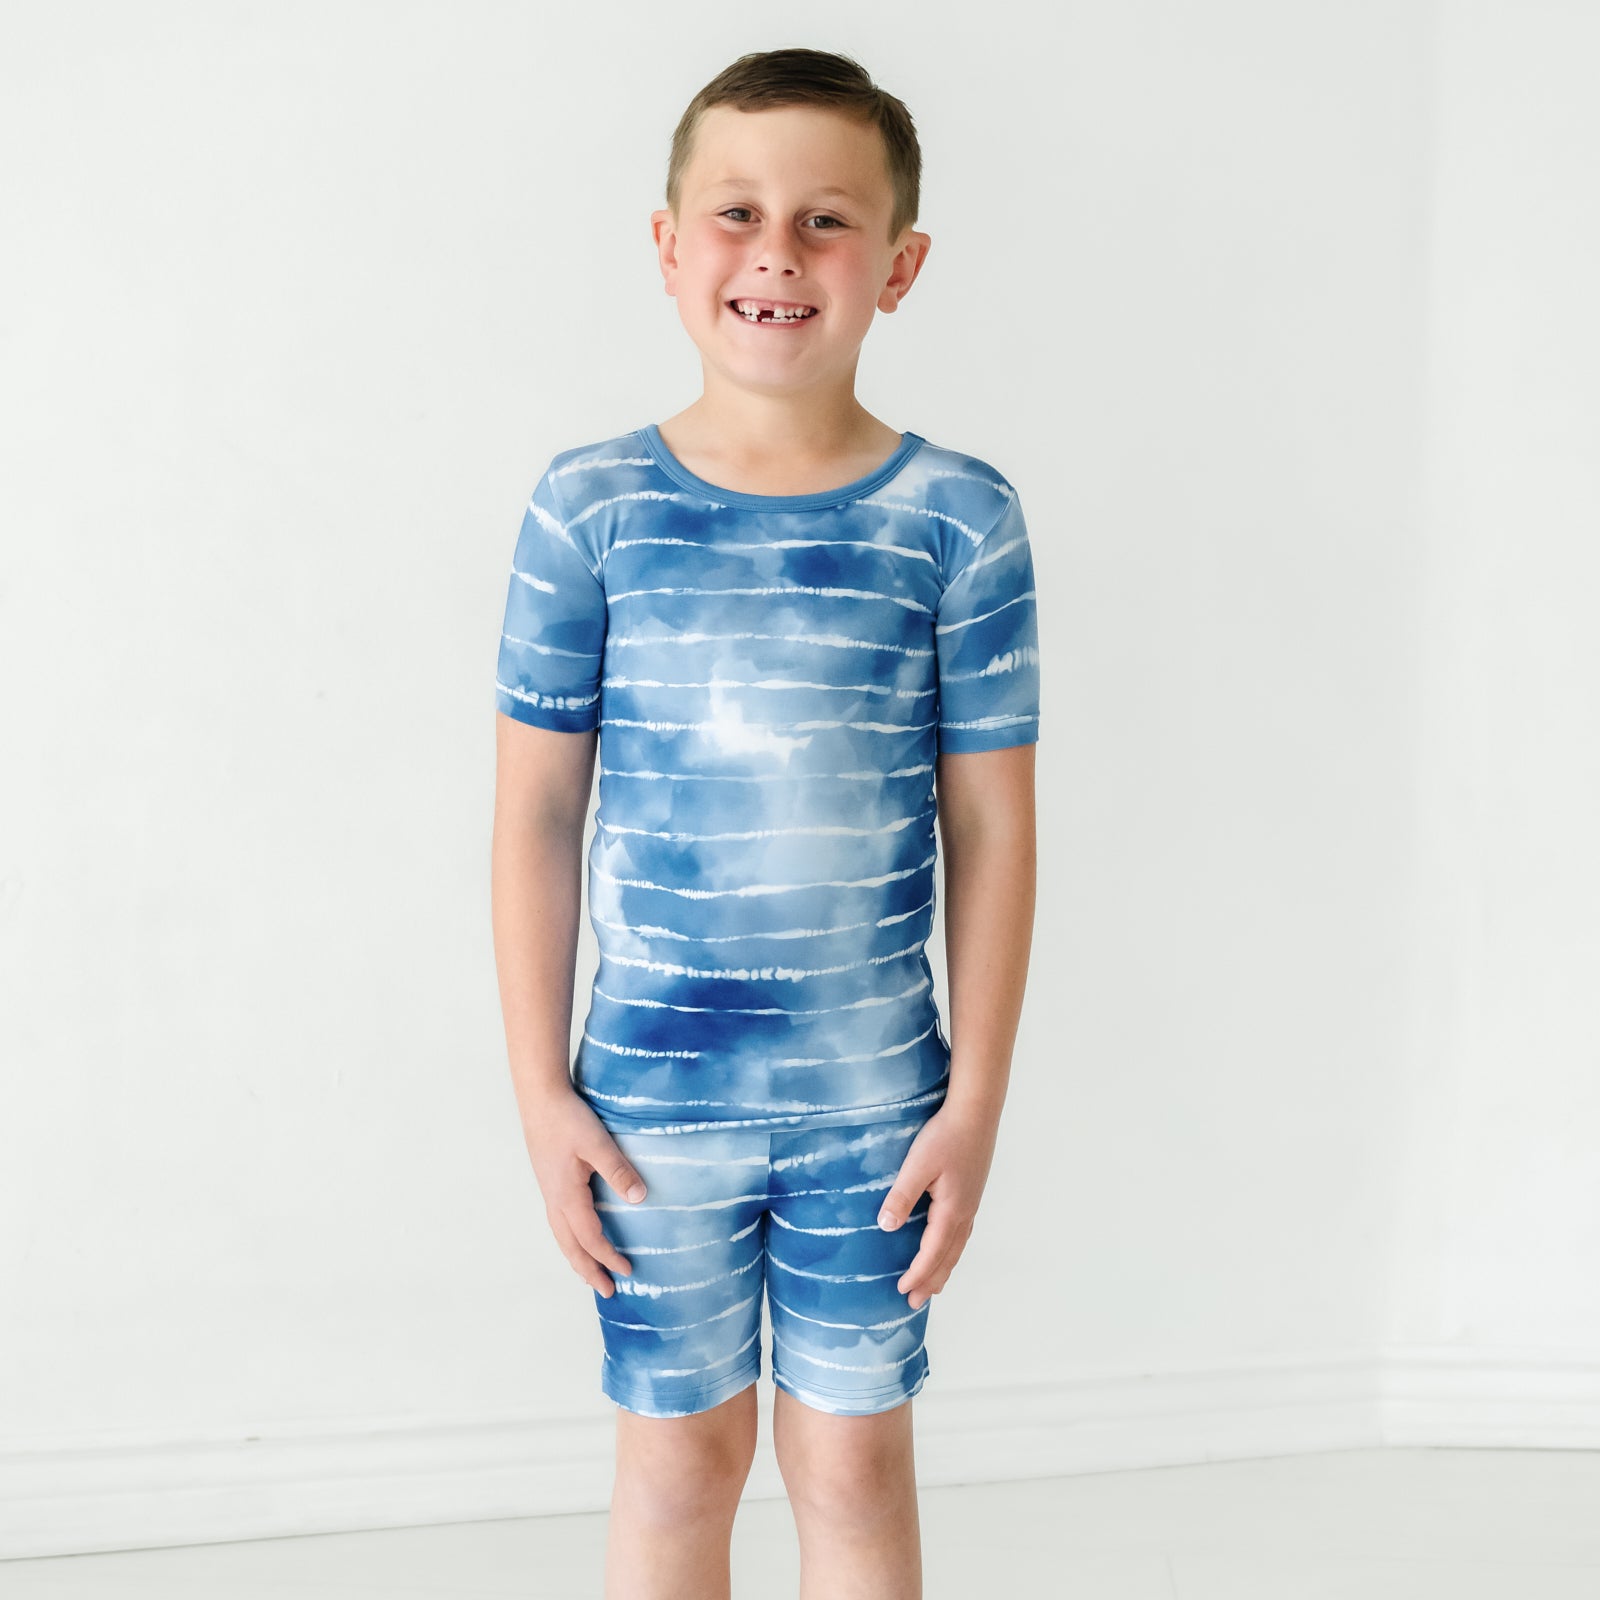 Child wearing a Blue Tie Dye Dreams two-piece short sleeve & shorts pajama set